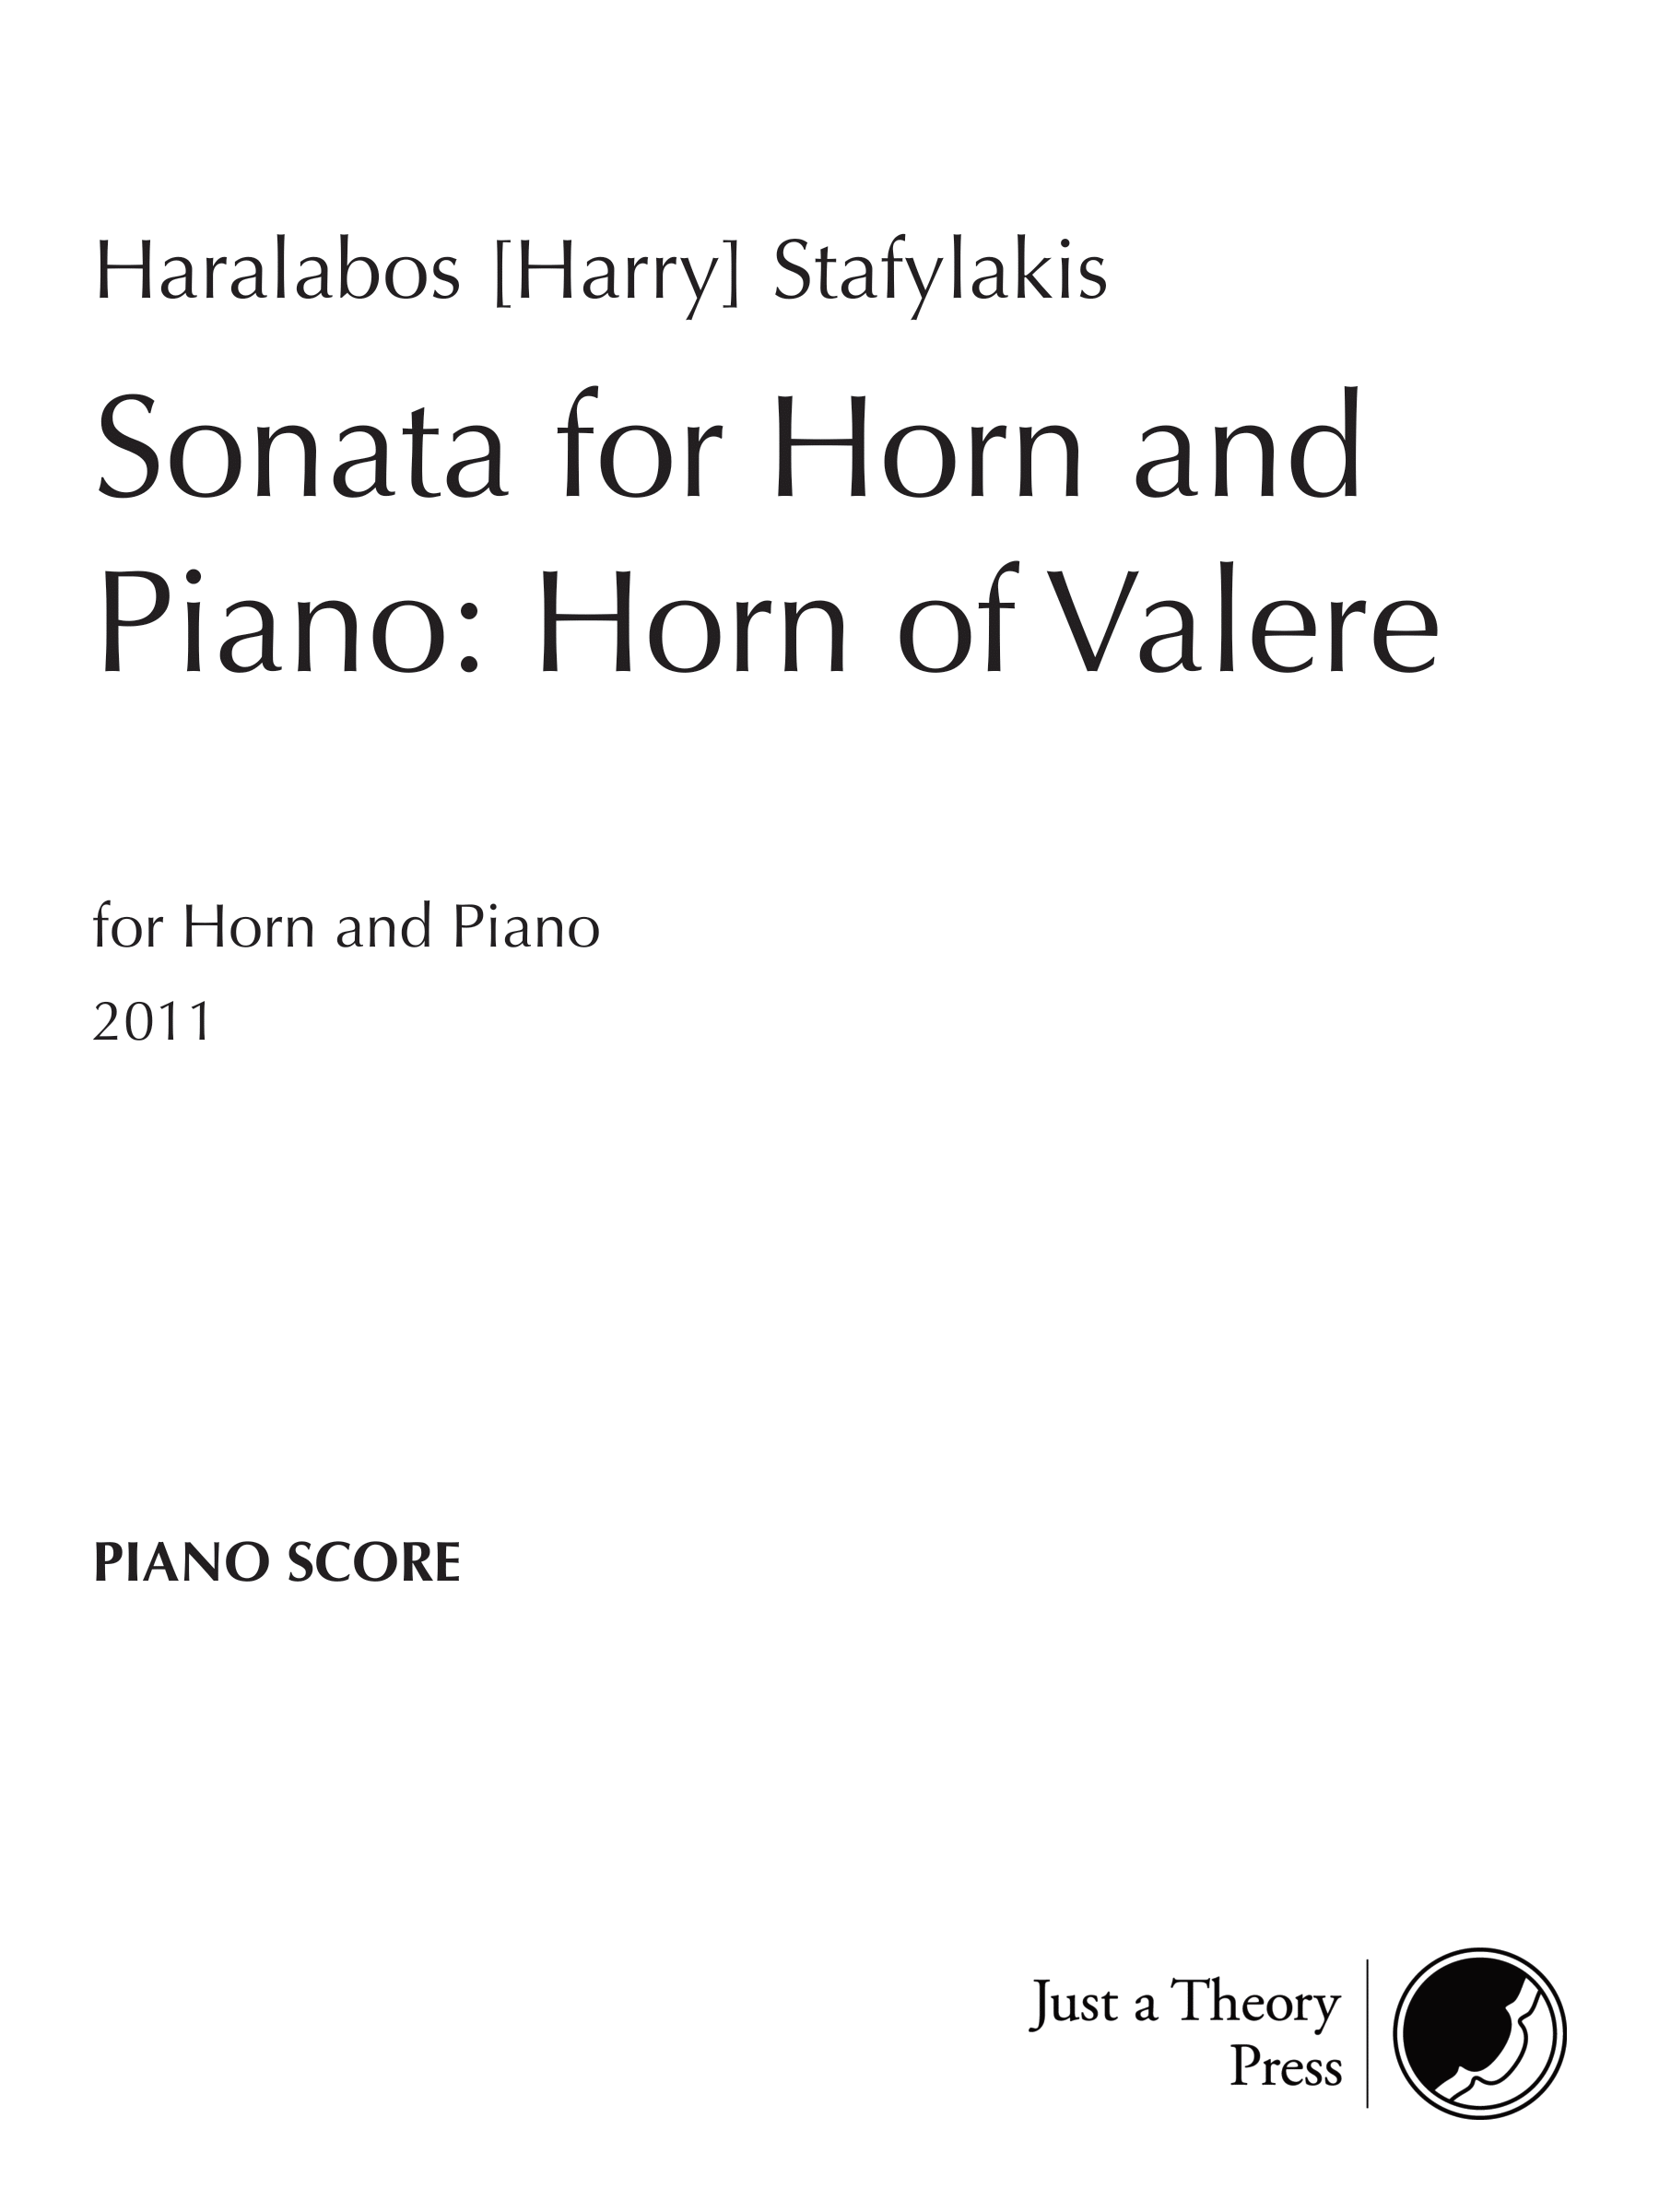 Sonata for Horn and Piano: Horn of Valere